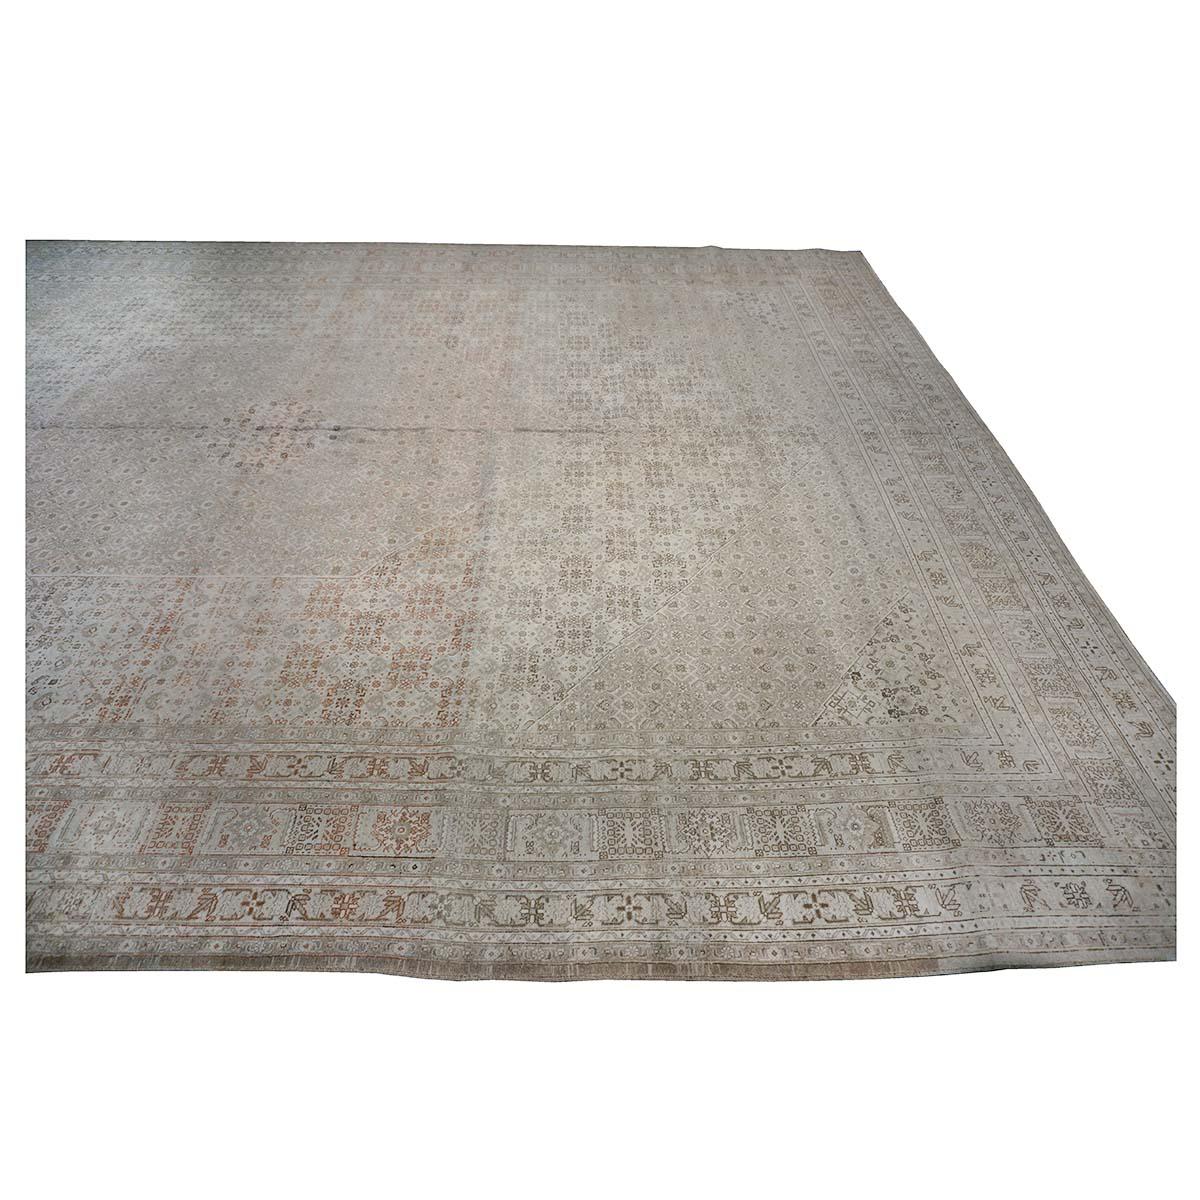 Antique Shabby Chic Distressed Persian Tabriz 13x18 Ivory & Tan Handmade Rug For Sale 5